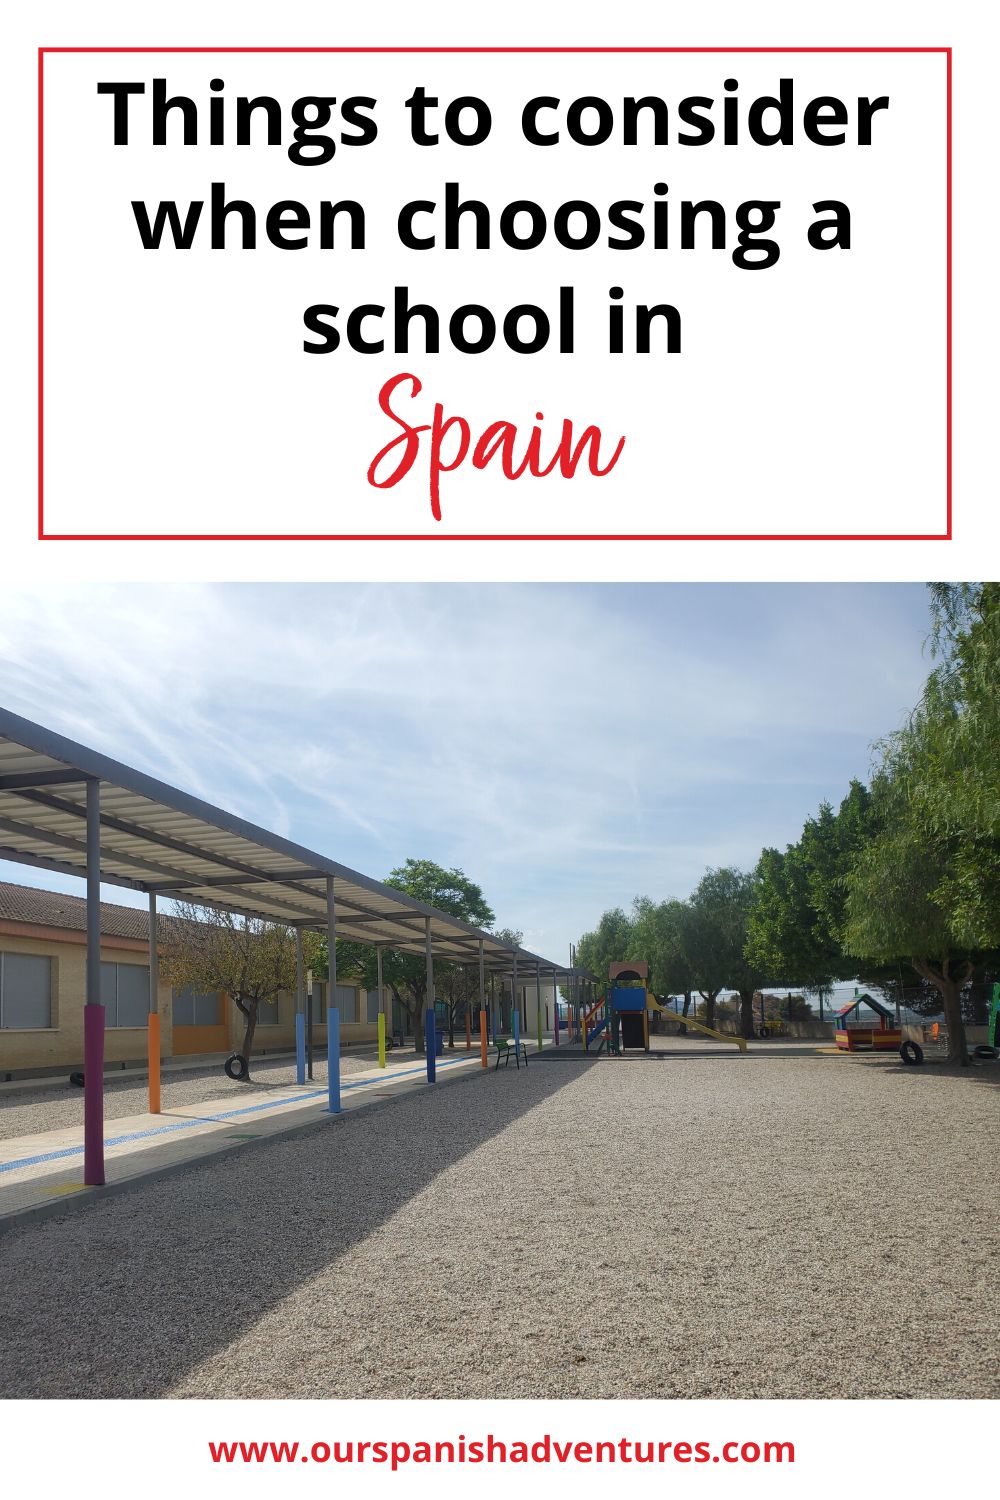 Things to consider when choosing a school in Spain | Our Spanish Adventures